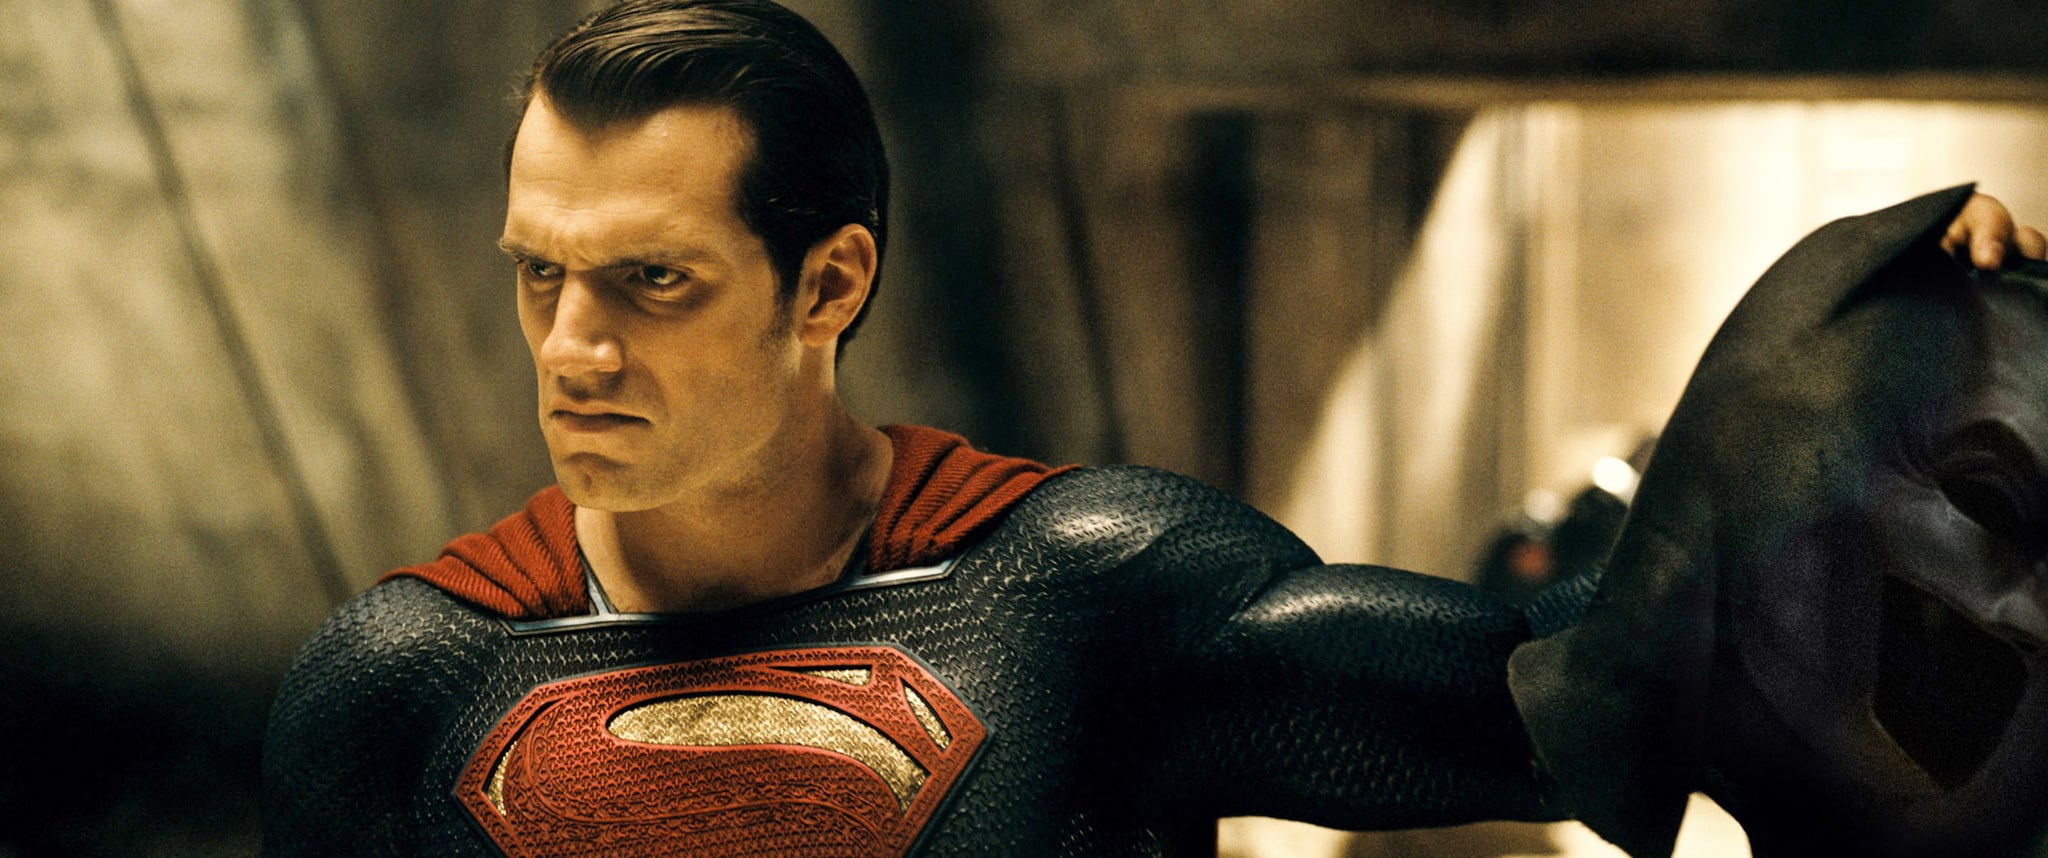 Man of Steel 2 Canceled? What's Next For Superman After Cavill